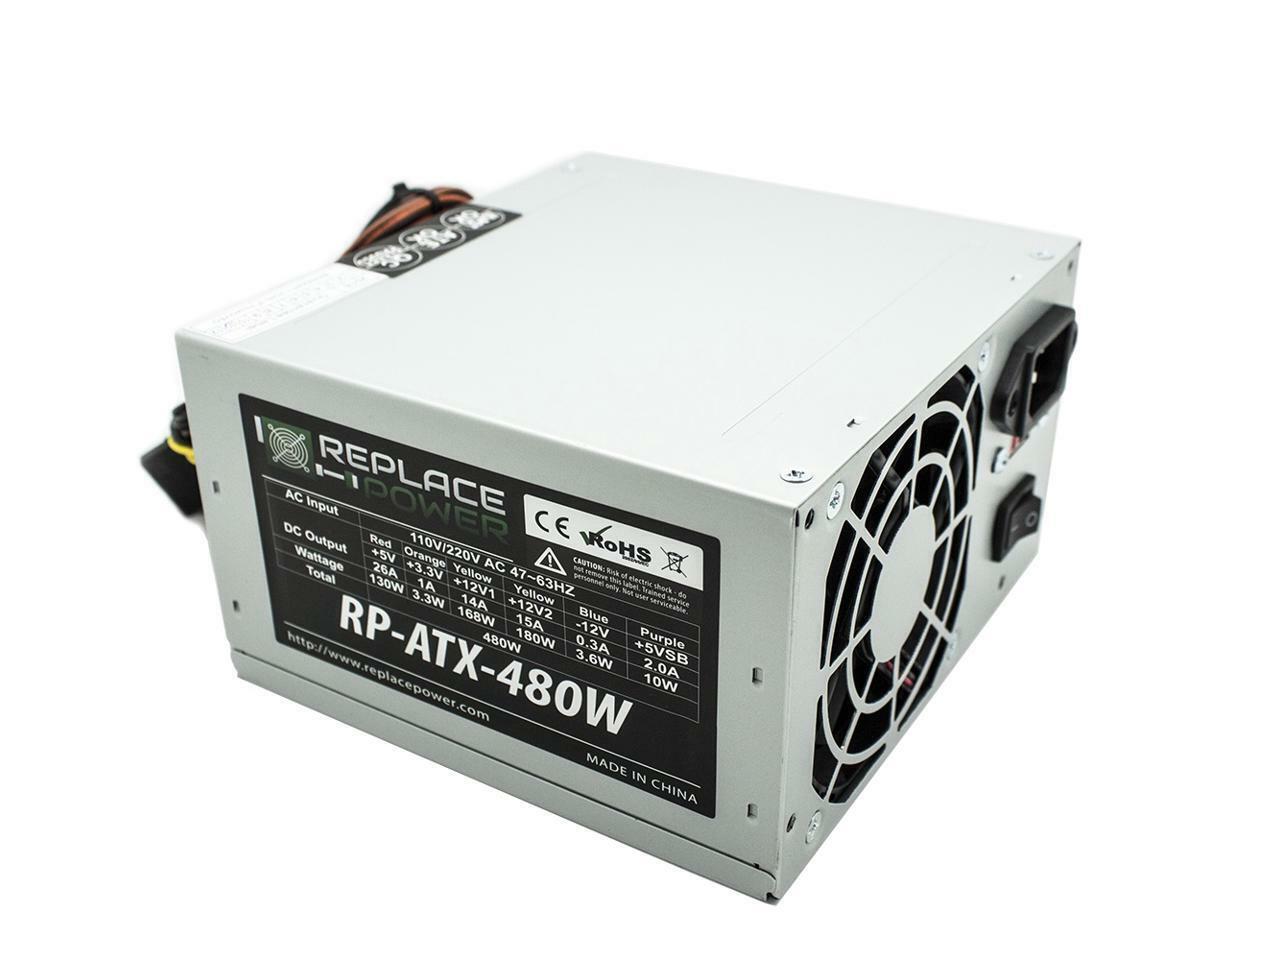 Replace Power Replacement PSU for Bestec ATX-250-12Z-D2R 250W HP P/N 410507-001